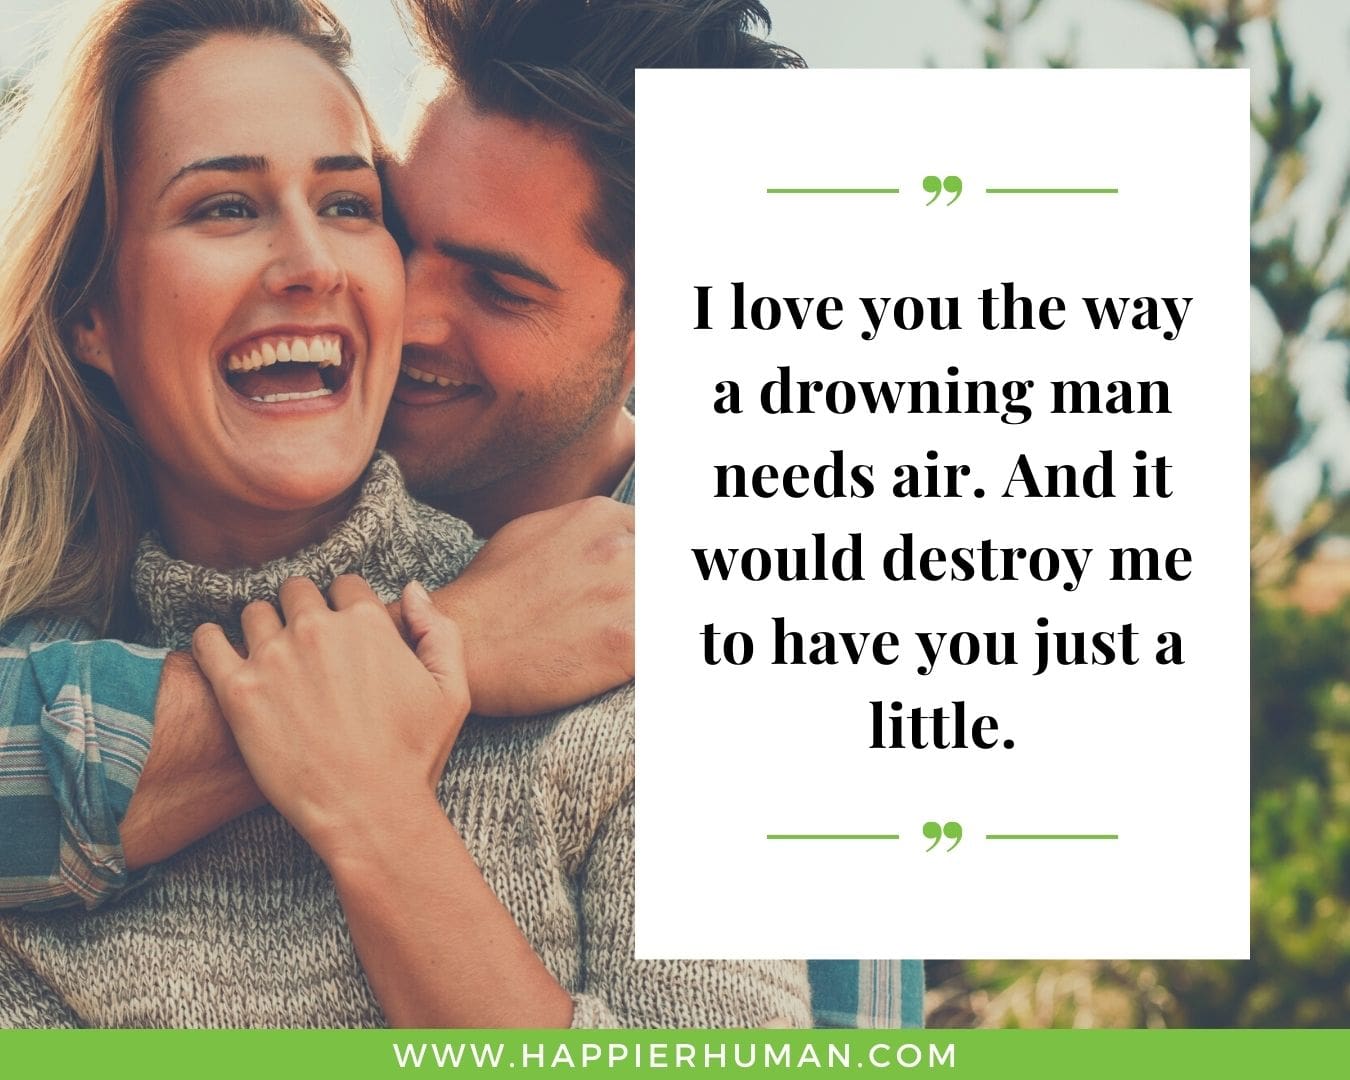 Sweet and Romantic Love Quotes for Her - “I love you the way a drowning man needs air. And it would destroy me to have you just a little.